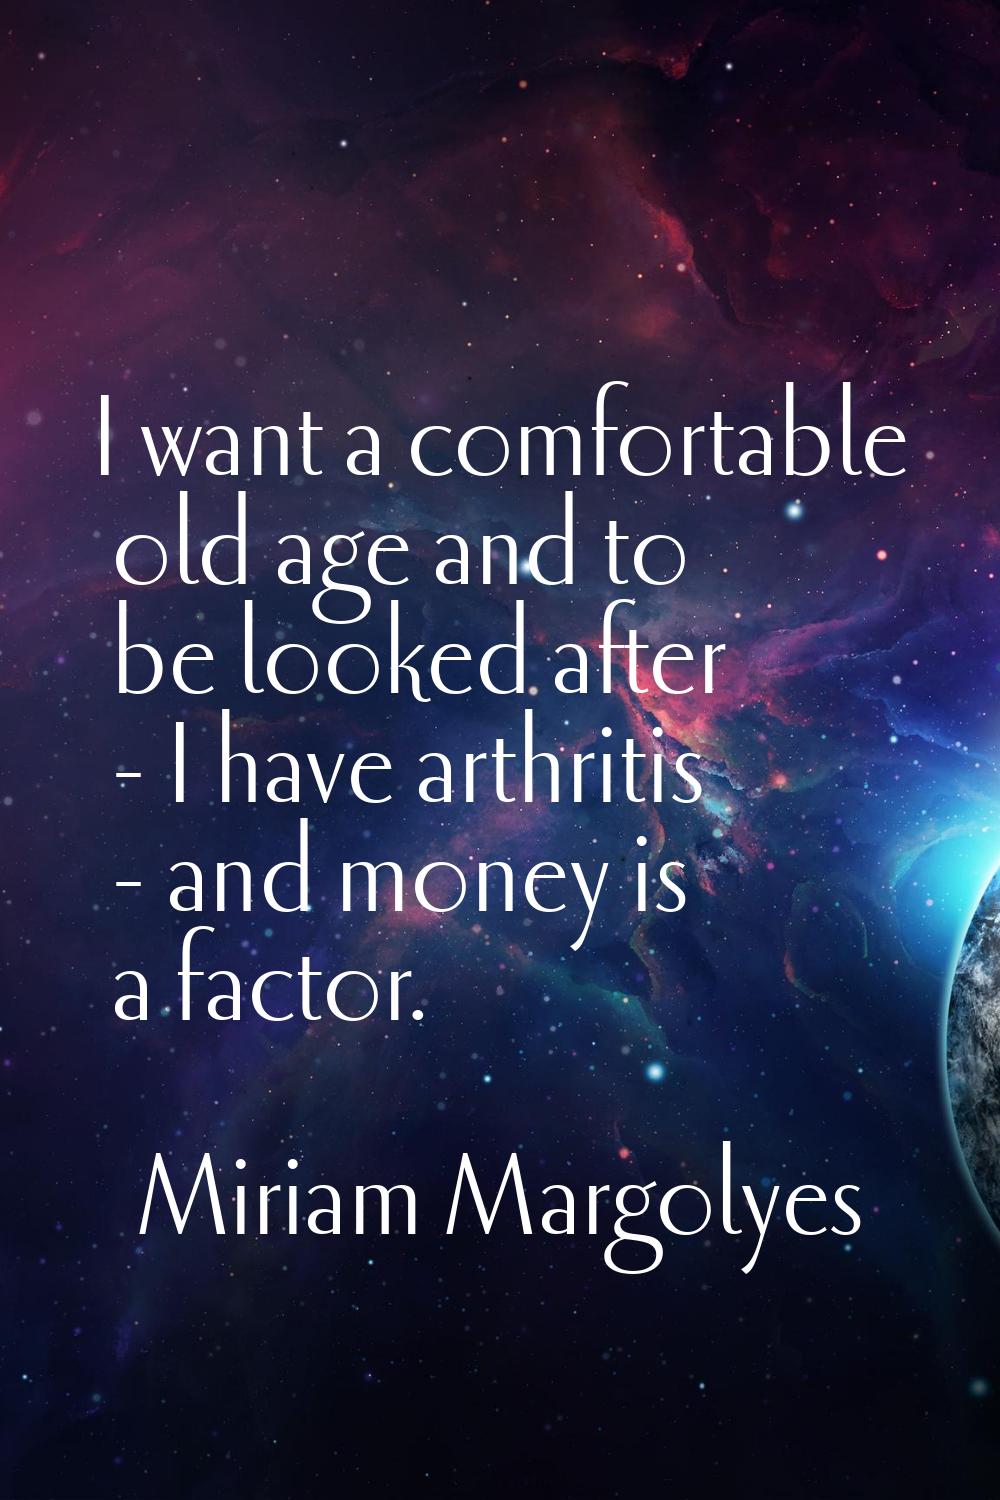 I want a comfortable old age and to be looked after - I have arthritis - and money is a factor.